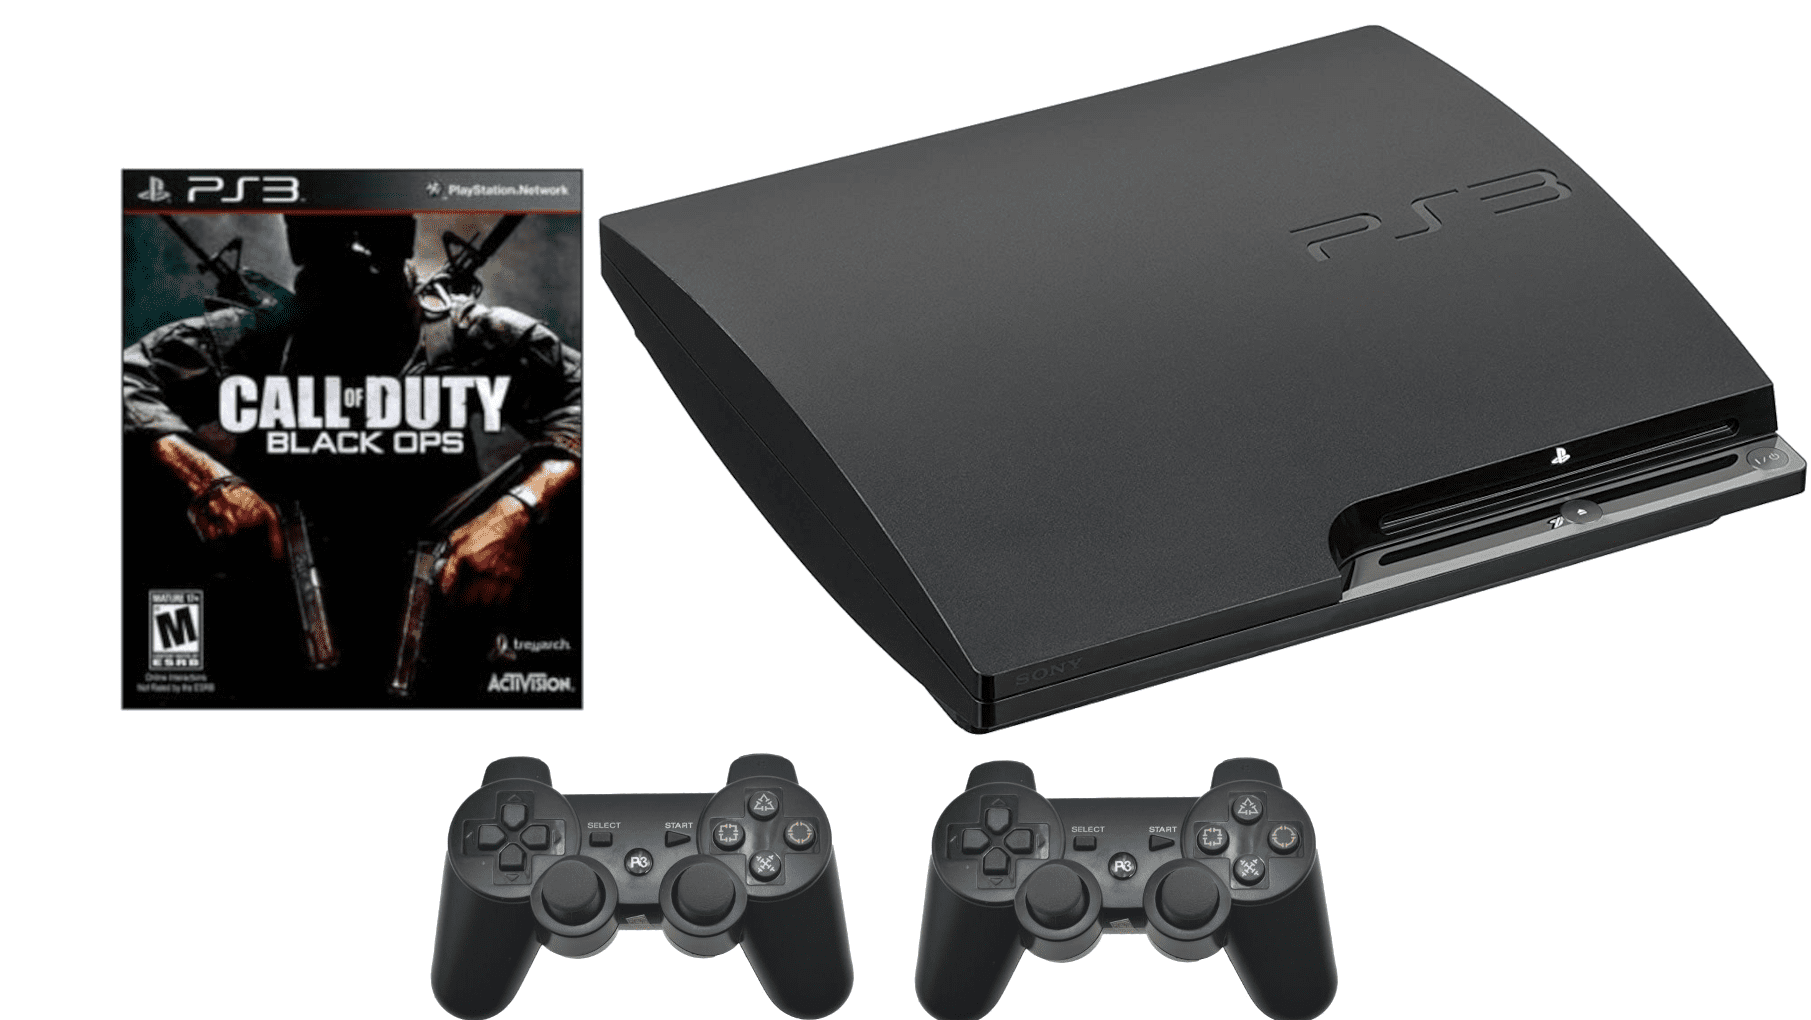 Sony PlayStation 3 PS3 Console 2 Controllers - Black Ops Bundle Walmart.com